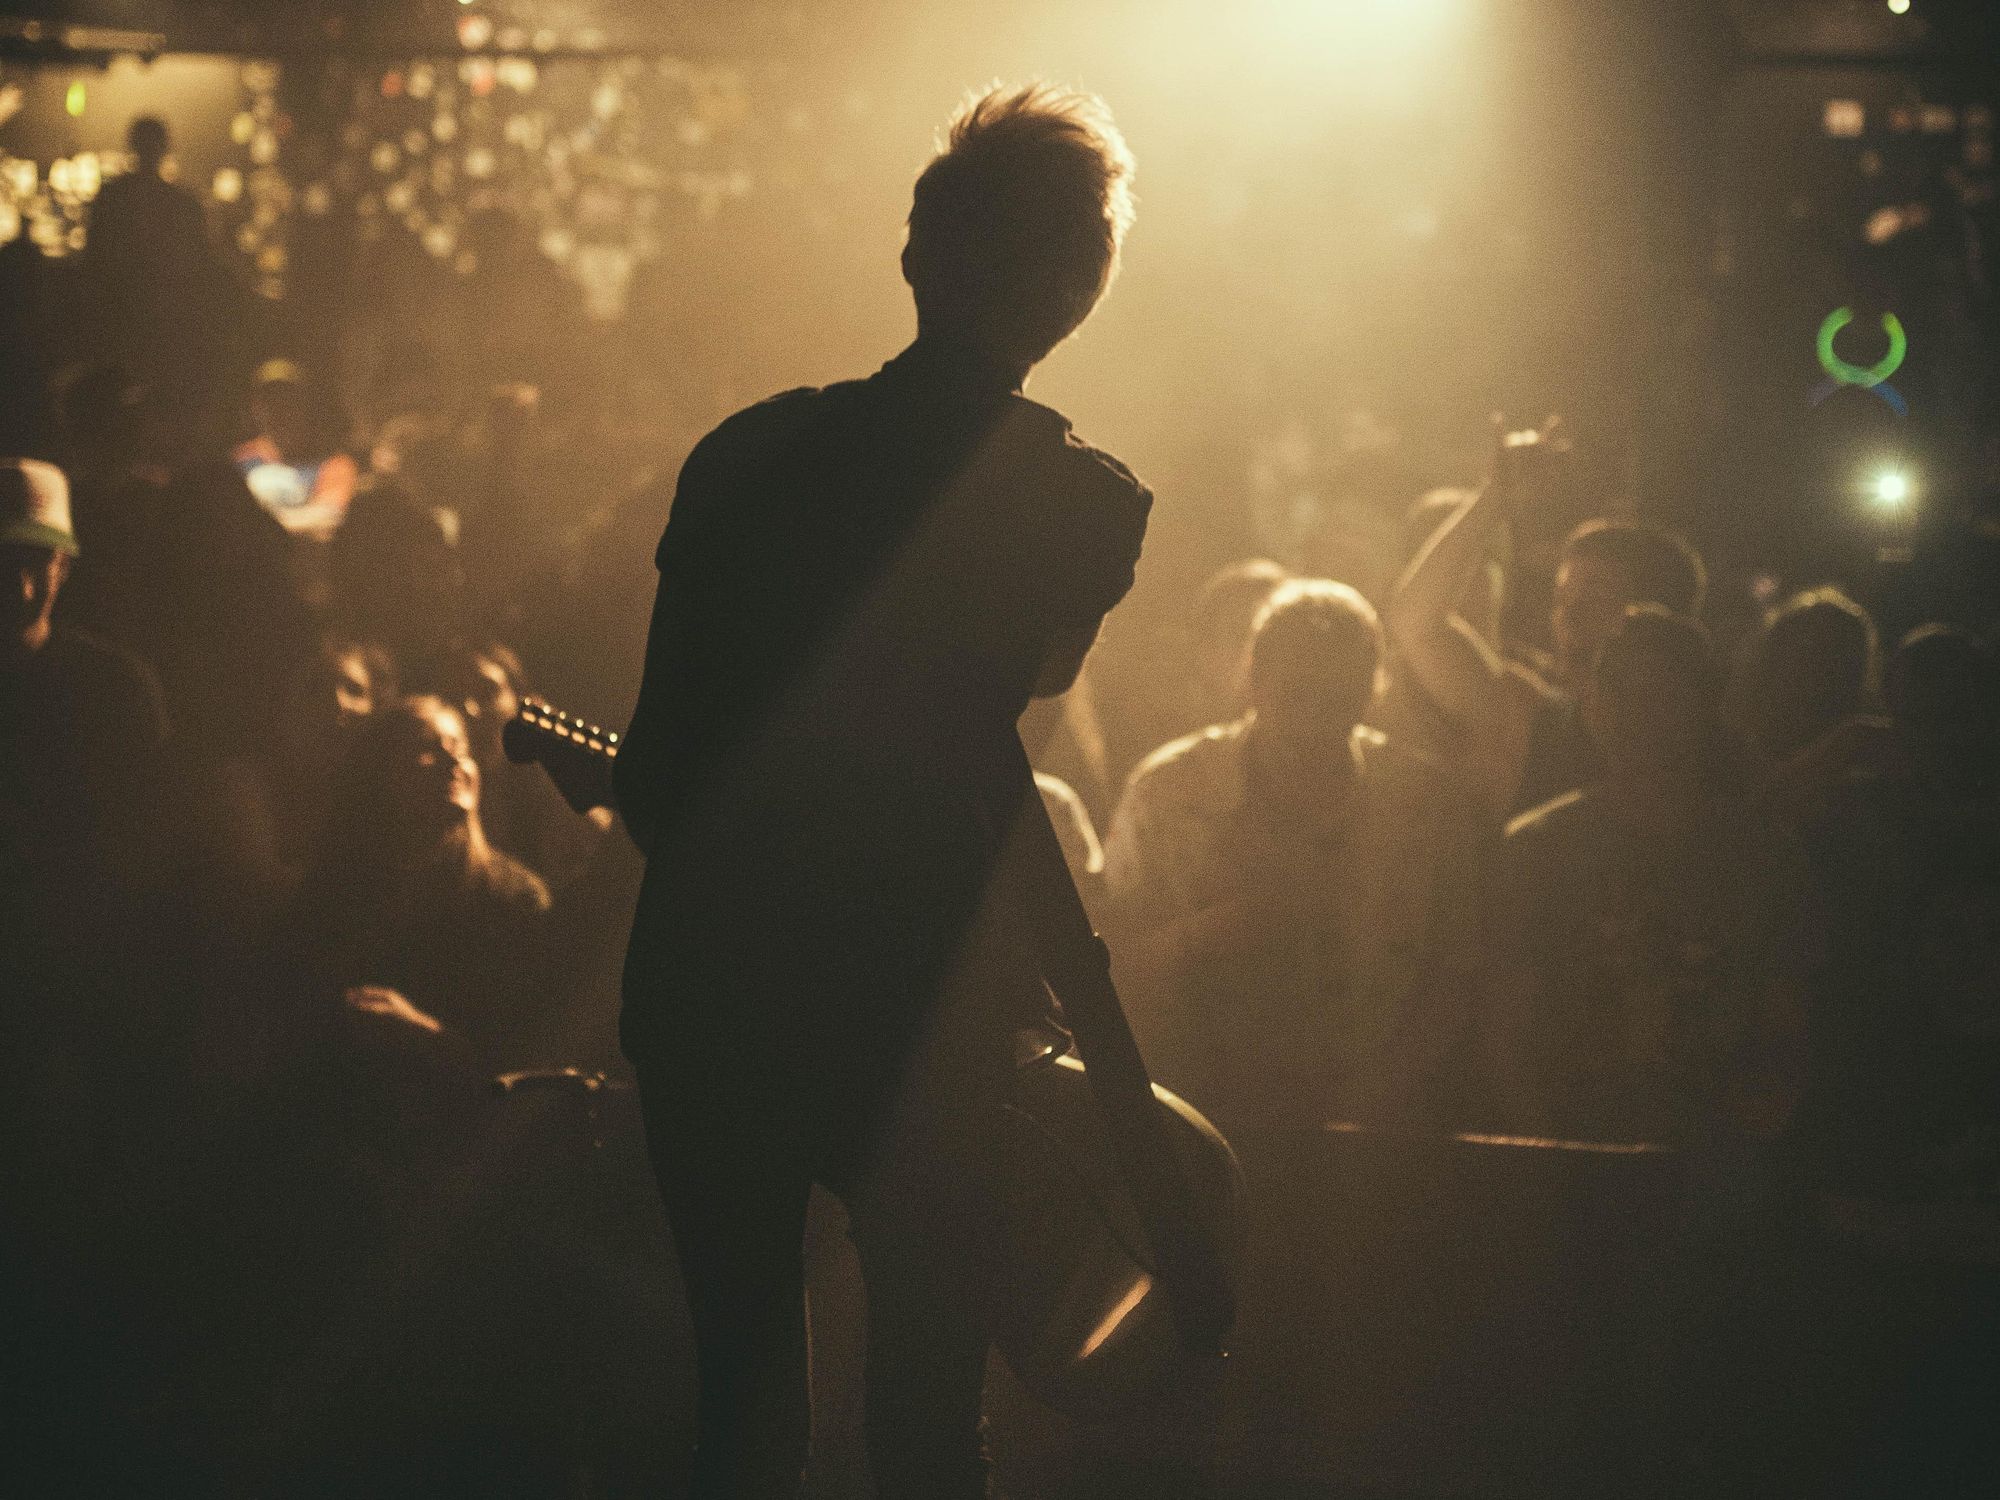 A performer's silhouette during a show.